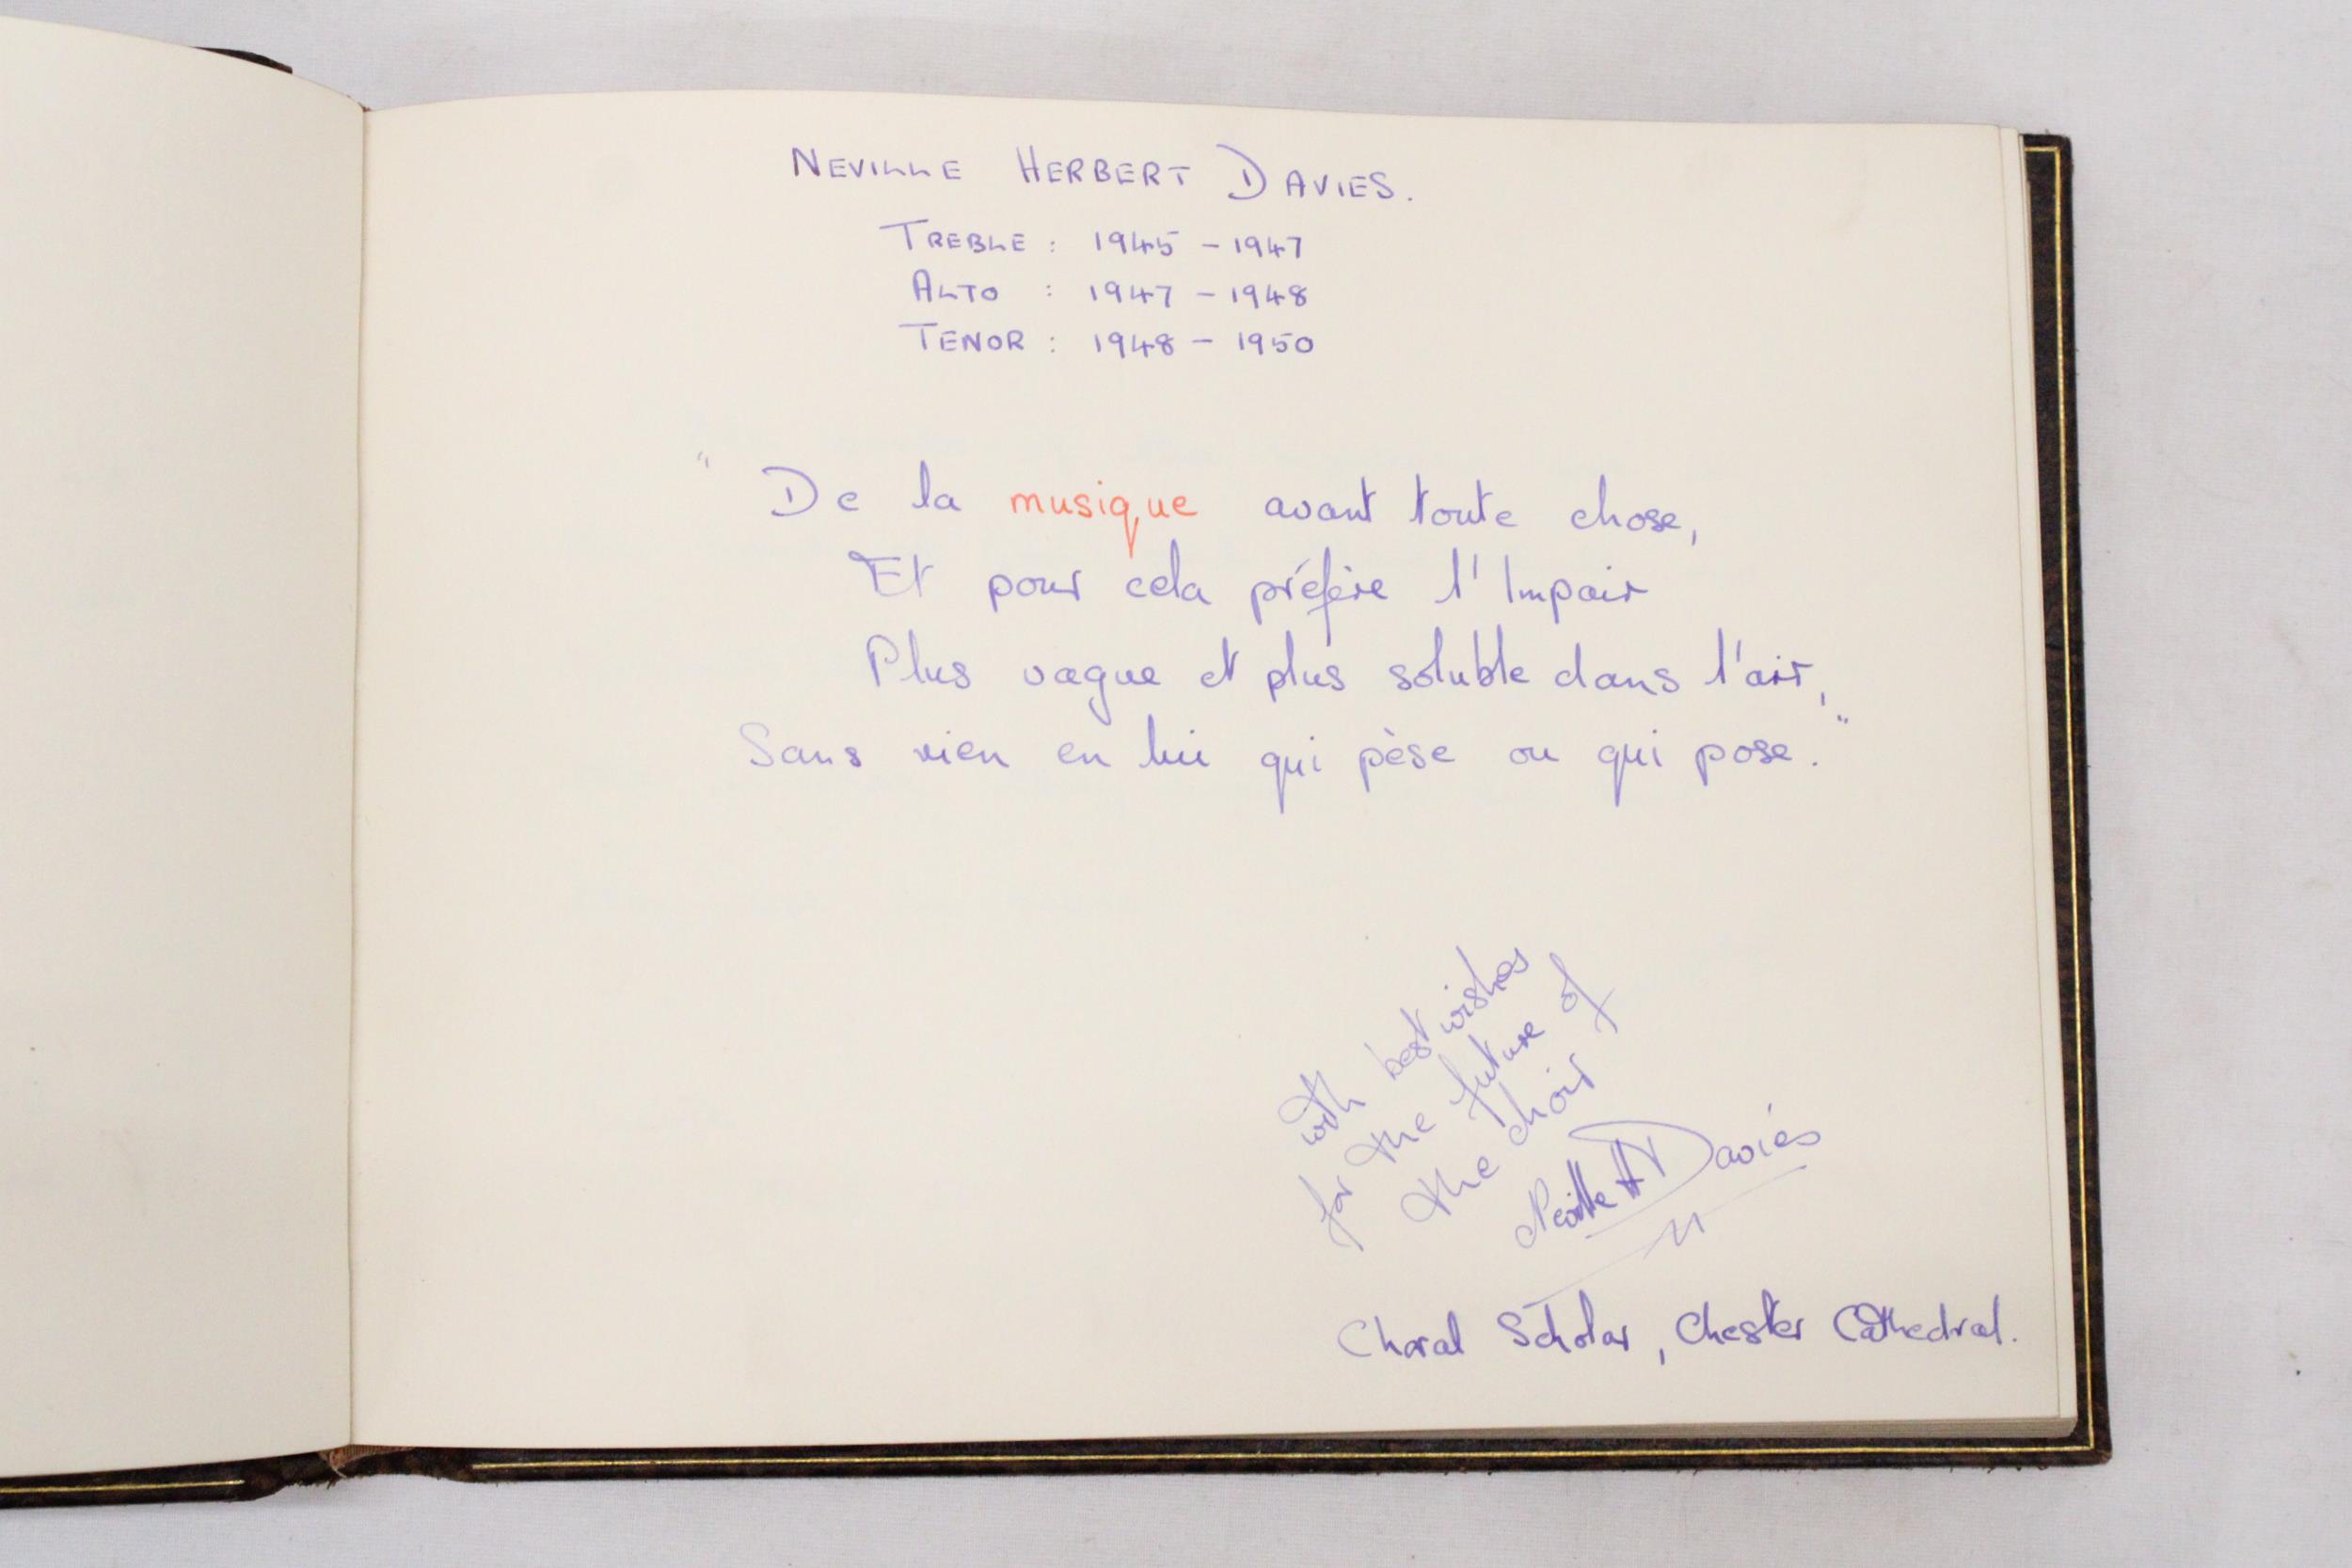 A VINTAGE LEATHER BOUND AUTOGRAPH BOOK FROM THE 1940'S WITH MOSTLY RELIGIOUS ENTRIES - Image 5 of 6